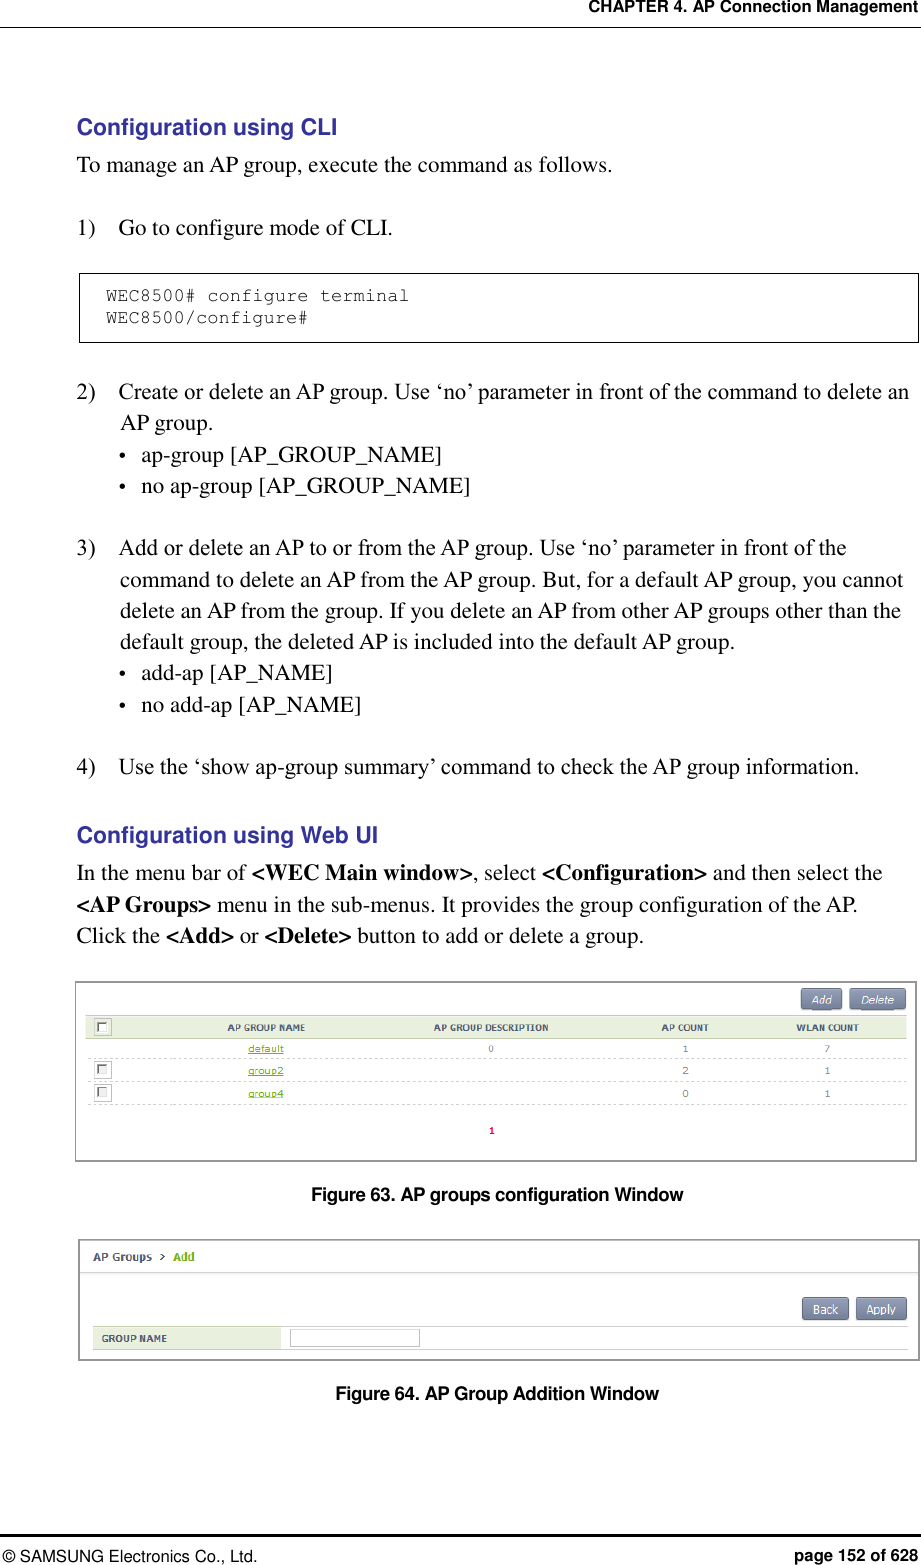 CHAPTER 4. AP Connection Management ©  SAMSUNG Electronics Co., Ltd.  page 152 of 628 Configuration using CLI To manage an AP group, execute the command as follows.  1)    Go to configure mode of CLI.  WEC8500# configure terminal WEC8500/configure#  2)    Create or delete an AP group. Use ‘no’ parameter in front of the command to delete an AP group.    ap-group [AP_GROUP_NAME]  no ap-group [AP_GROUP_NAME]  3)    Add or delete an AP to or from the AP group. Use ‘no’ parameter in front of the command to delete an AP from the AP group. But, for a default AP group, you cannot delete an AP from the group. If you delete an AP from other AP groups other than the default group, the deleted AP is included into the default AP group.  add-ap [AP_NAME]  no add-ap [AP_NAME]  4)    Use the ‘show ap-group summary’ command to check the AP group information.  Configuration using Web UI In the menu bar of &lt;WEC Main window&gt;, select &lt;Configuration&gt; and then select the &lt;AP Groups&gt; menu in the sub-menus. It provides the group configuration of the AP.   Click the &lt;Add&gt; or &lt;Delete&gt; button to add or delete a group.  Figure 63. AP groups configuration Window  Figure 64. AP Group Addition Window  